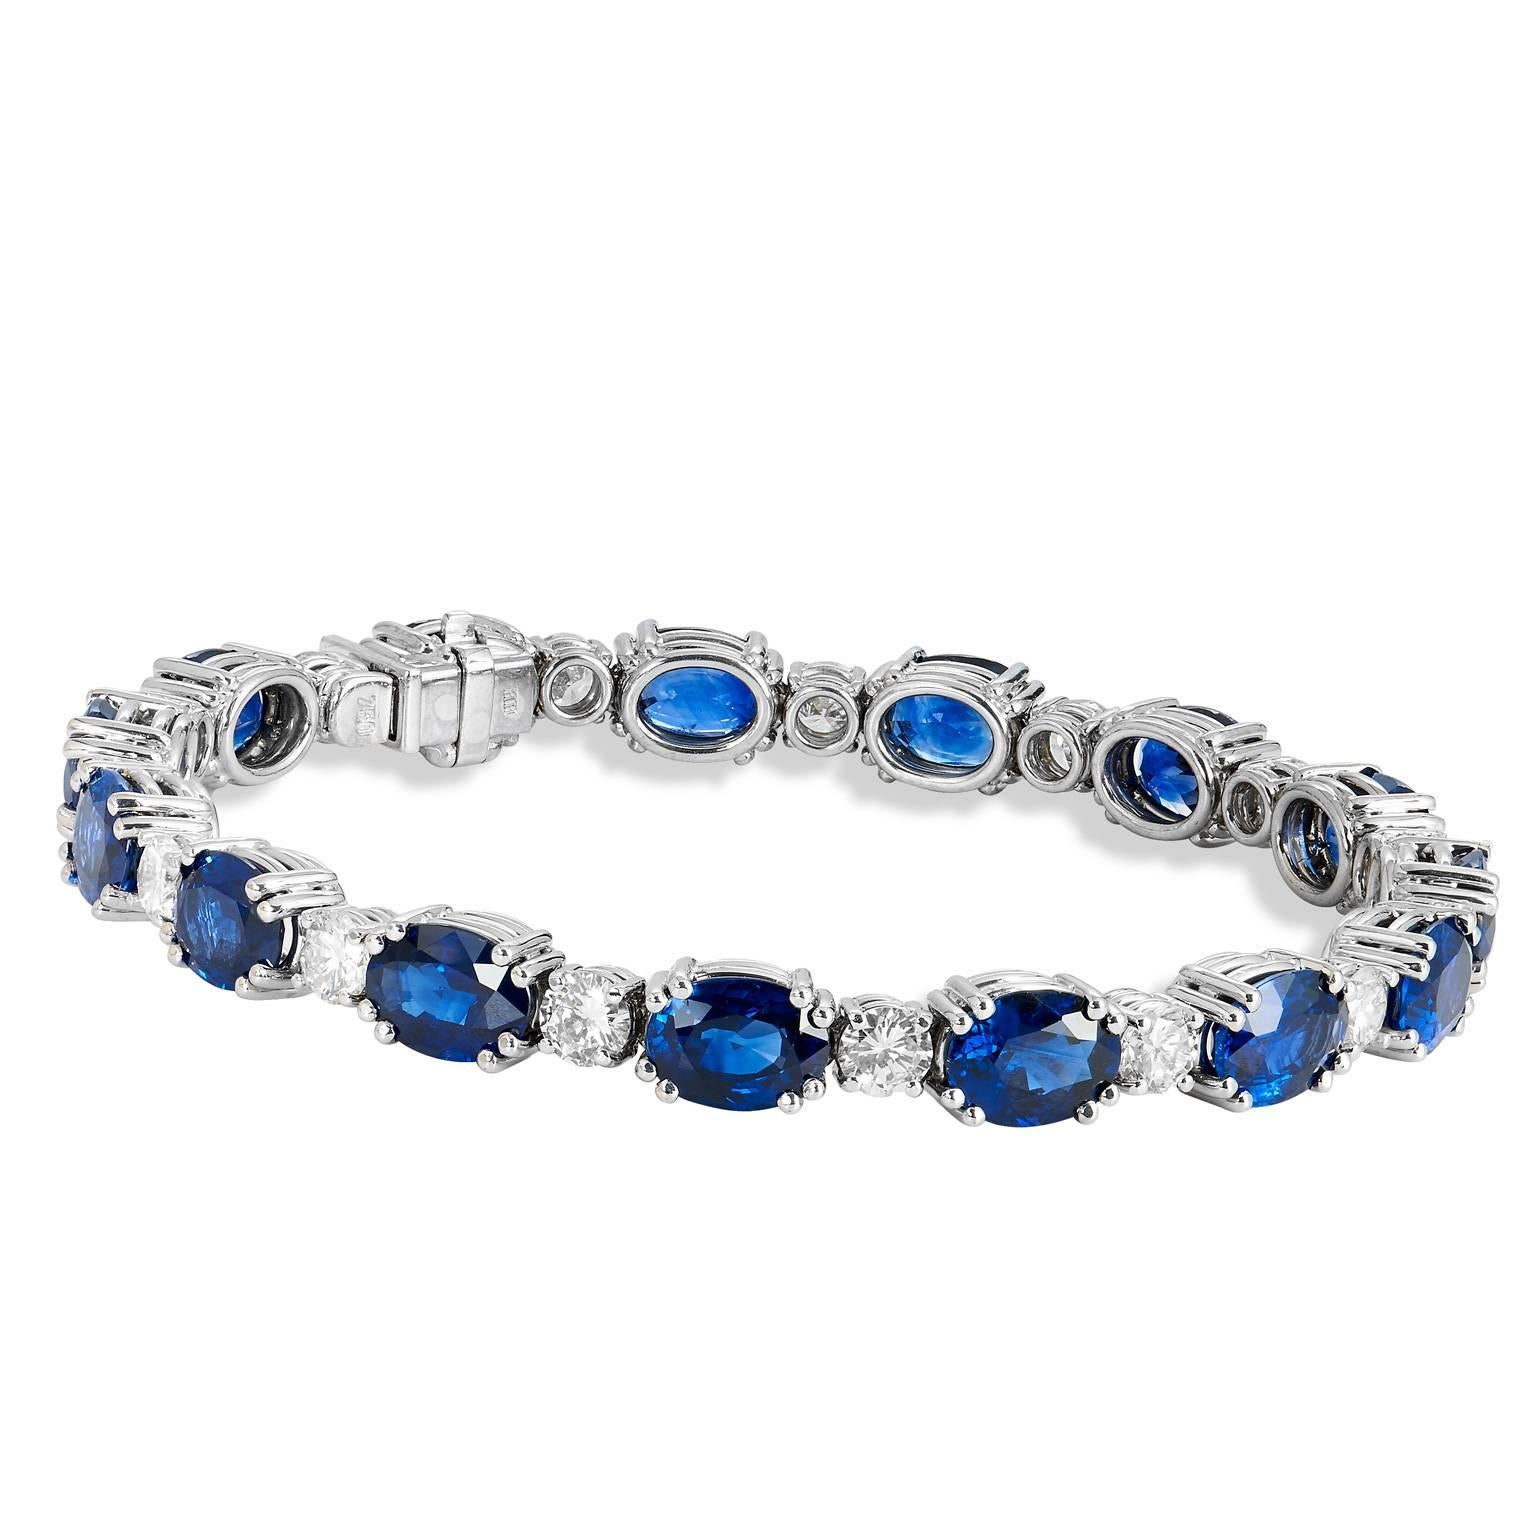 22.77 Carats Royal Blue Sapphires & 3.87 Carat Diamond Gold Tennis Bracelet

The sapphire has long been beloved for its stunning blue hues and its celestial associations. A dream gemstone for jewelers, the sapphire offers some of the most